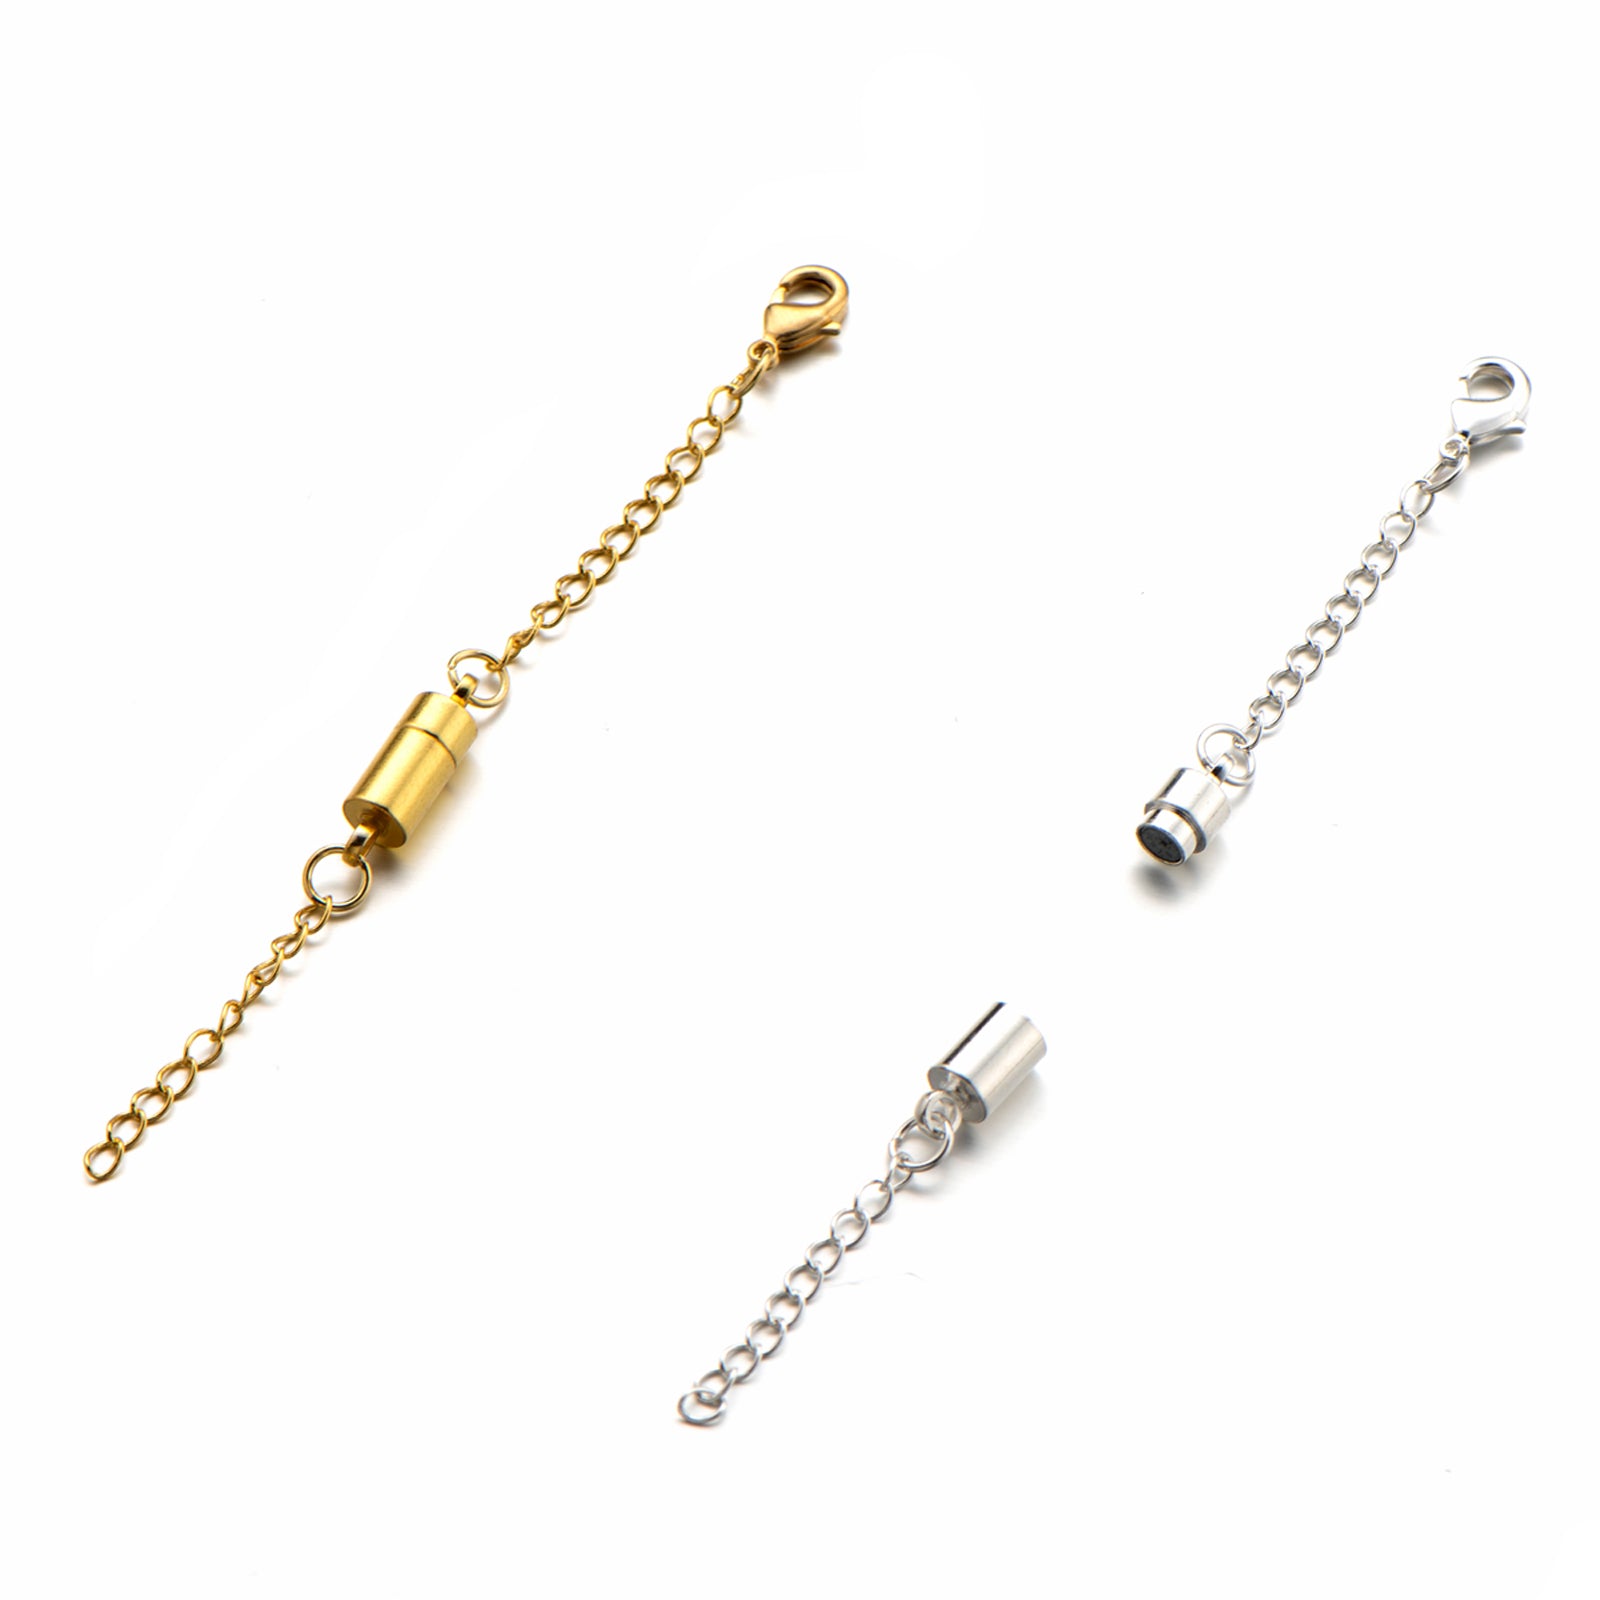 8Pcs Magnetic Locking Clasps, Chain Converters Necklace Extender